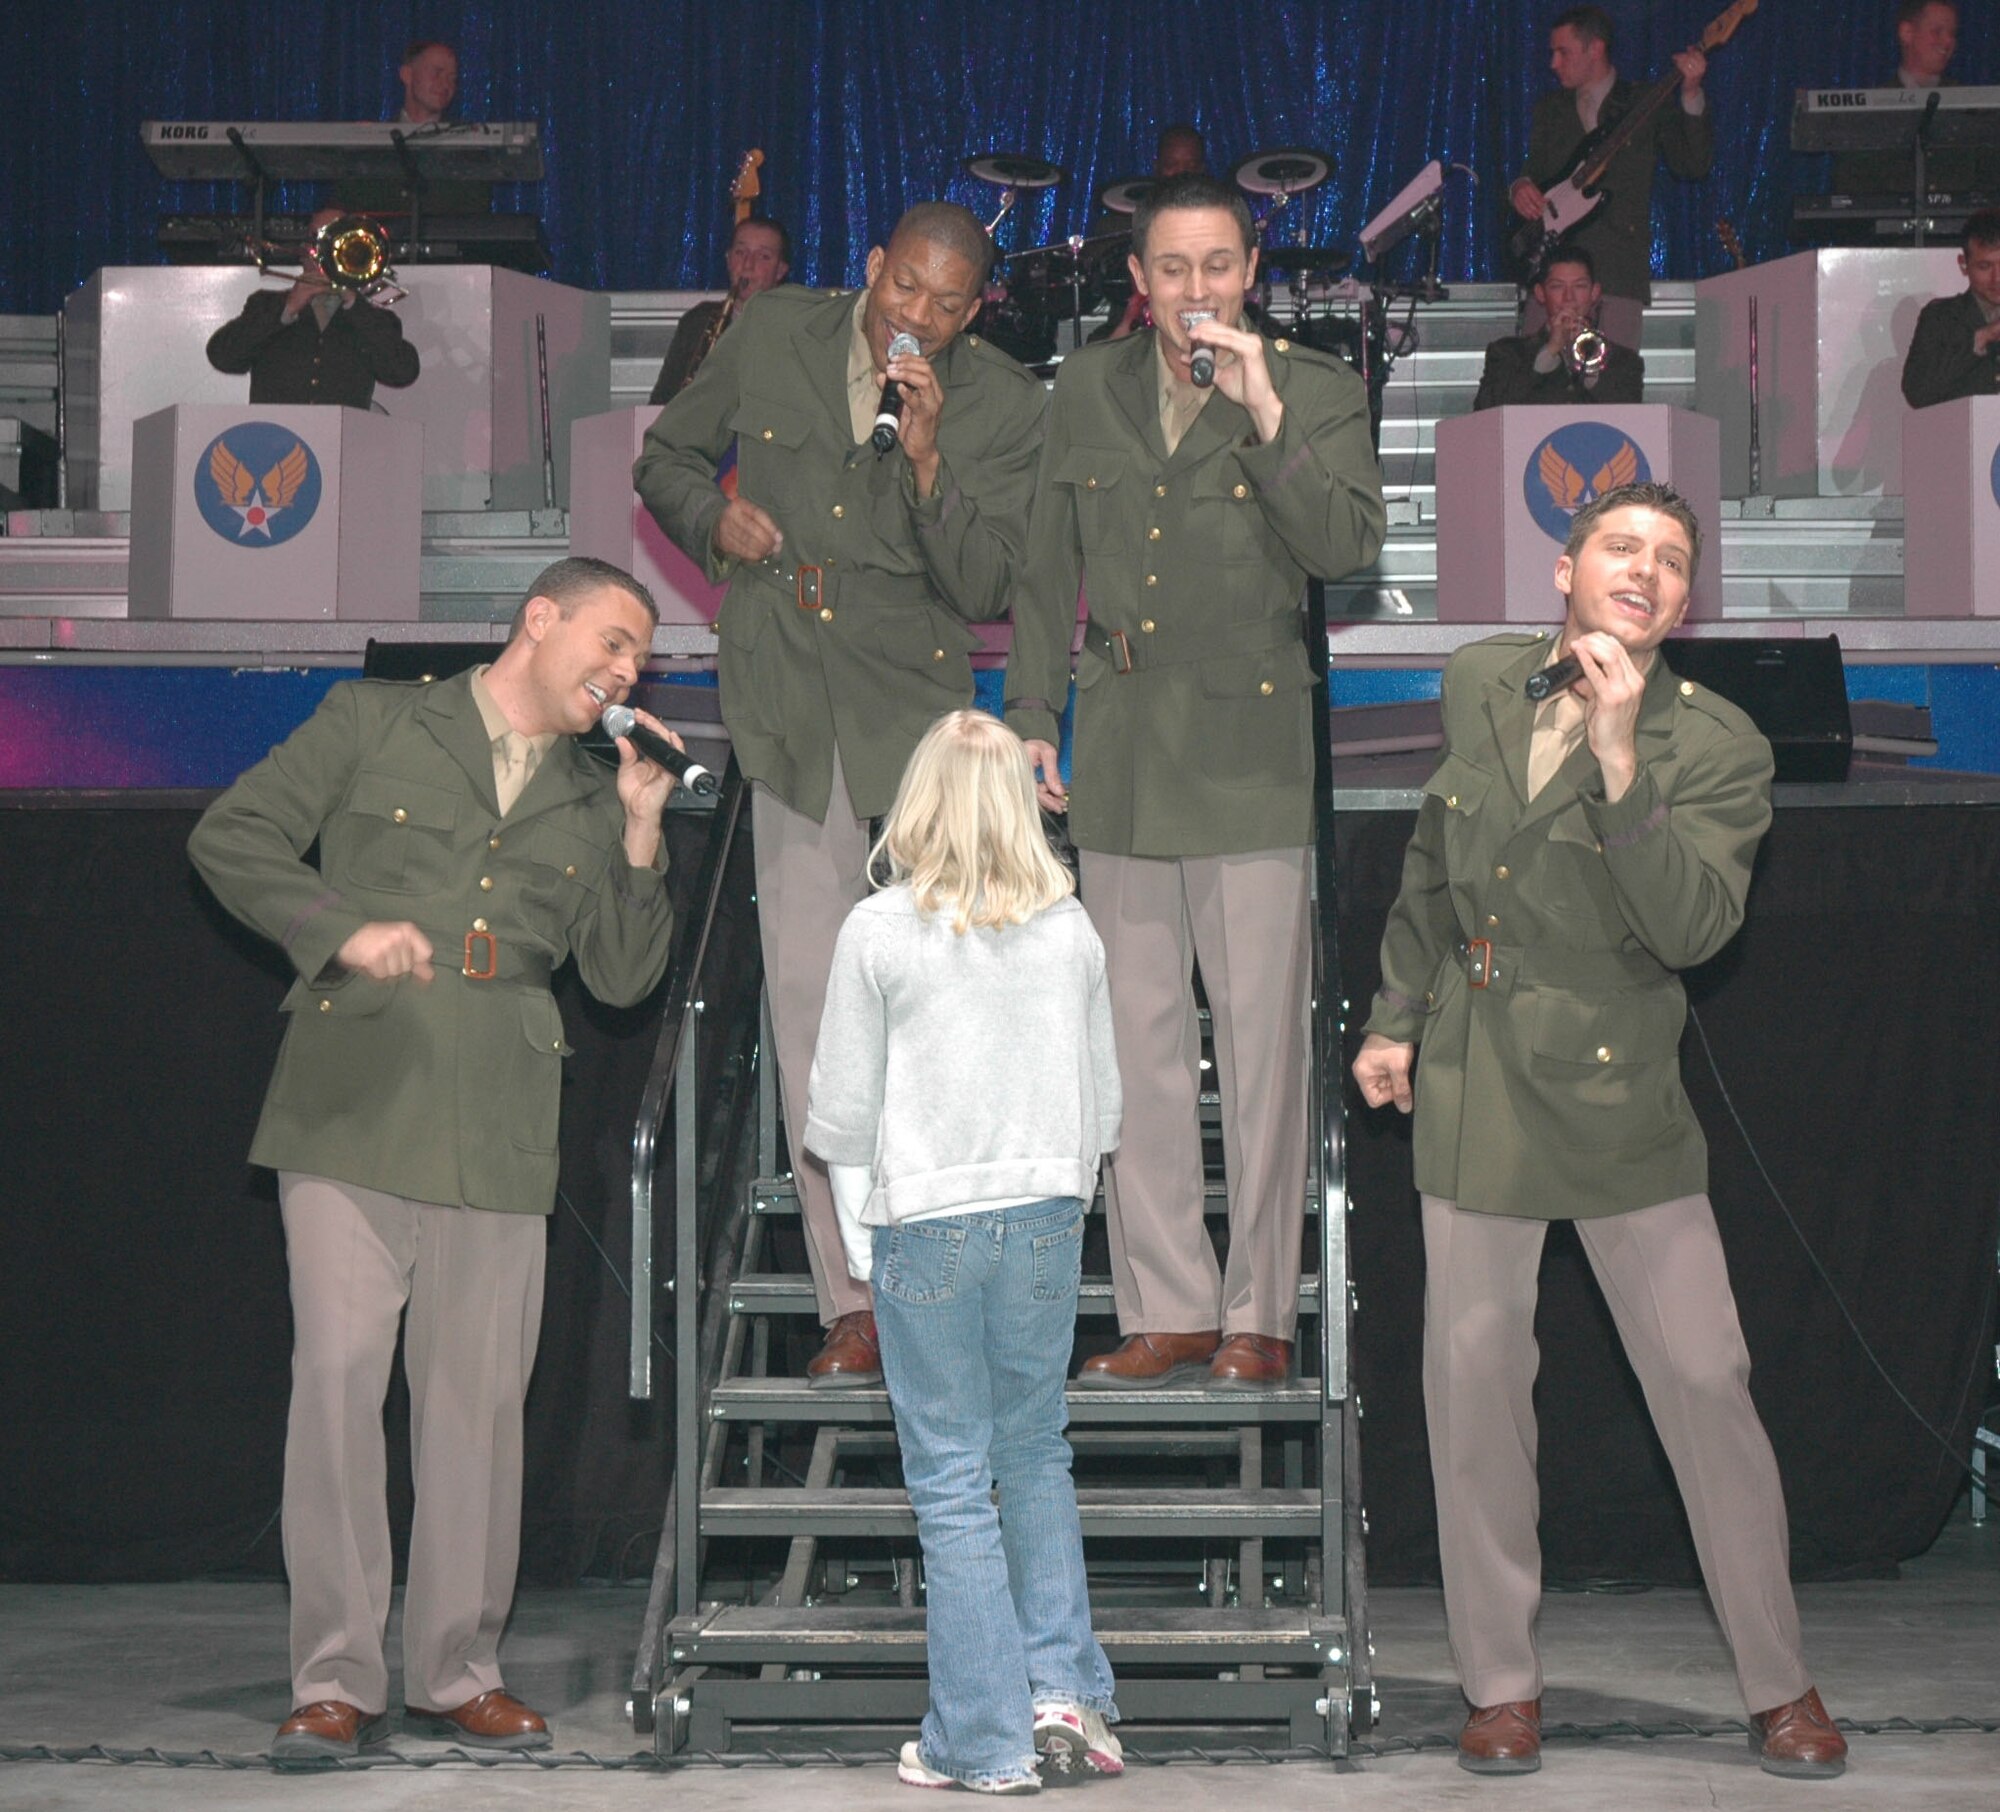 Senior Airman Nicholas Amari, Tops in Blue performer, sings during a performance at the Four Season's Arena Jan. 22. Tops in Blue is an all active-duty U.S. Air Force special unit comprised of 28 members picked for their talents in entertaining. The group sets up their own equipment weighing in at about 60,000 pounds and performs at 160 locations per year including deployed locations such as Afghanistan and Kyrgyzstan. This year's theme is "The Fly-By", commemorating the Air Force's 60th Anniversary. (U.S. Air Force photo/Airman 1st Class Dillon White)